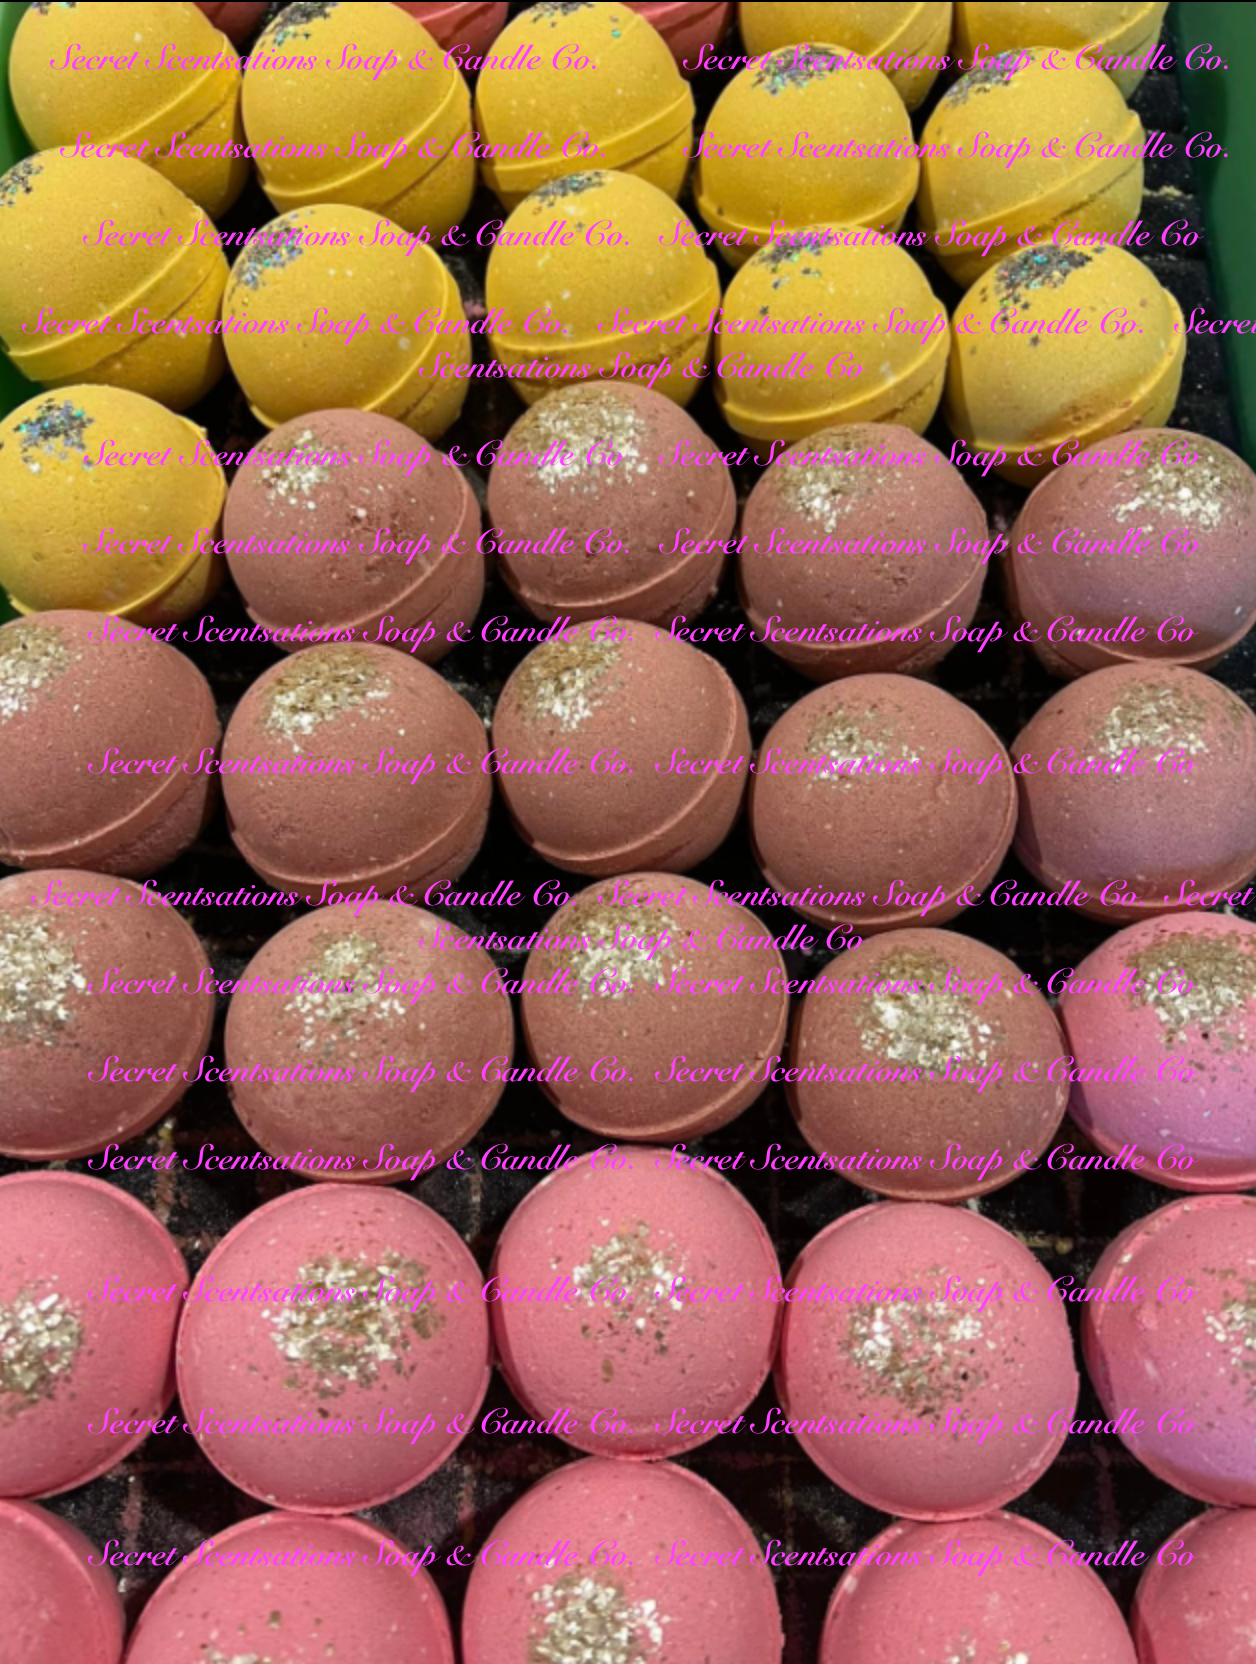 Bath Bombs Experience the magic of a beach getaway right in your own tub! Our expertly crafted bath bomb combines the thrill of color-changing wonders with a tropical infusion of Coconut and Pineapple Essential Oils, transforming your bath into a vacation for your senses.